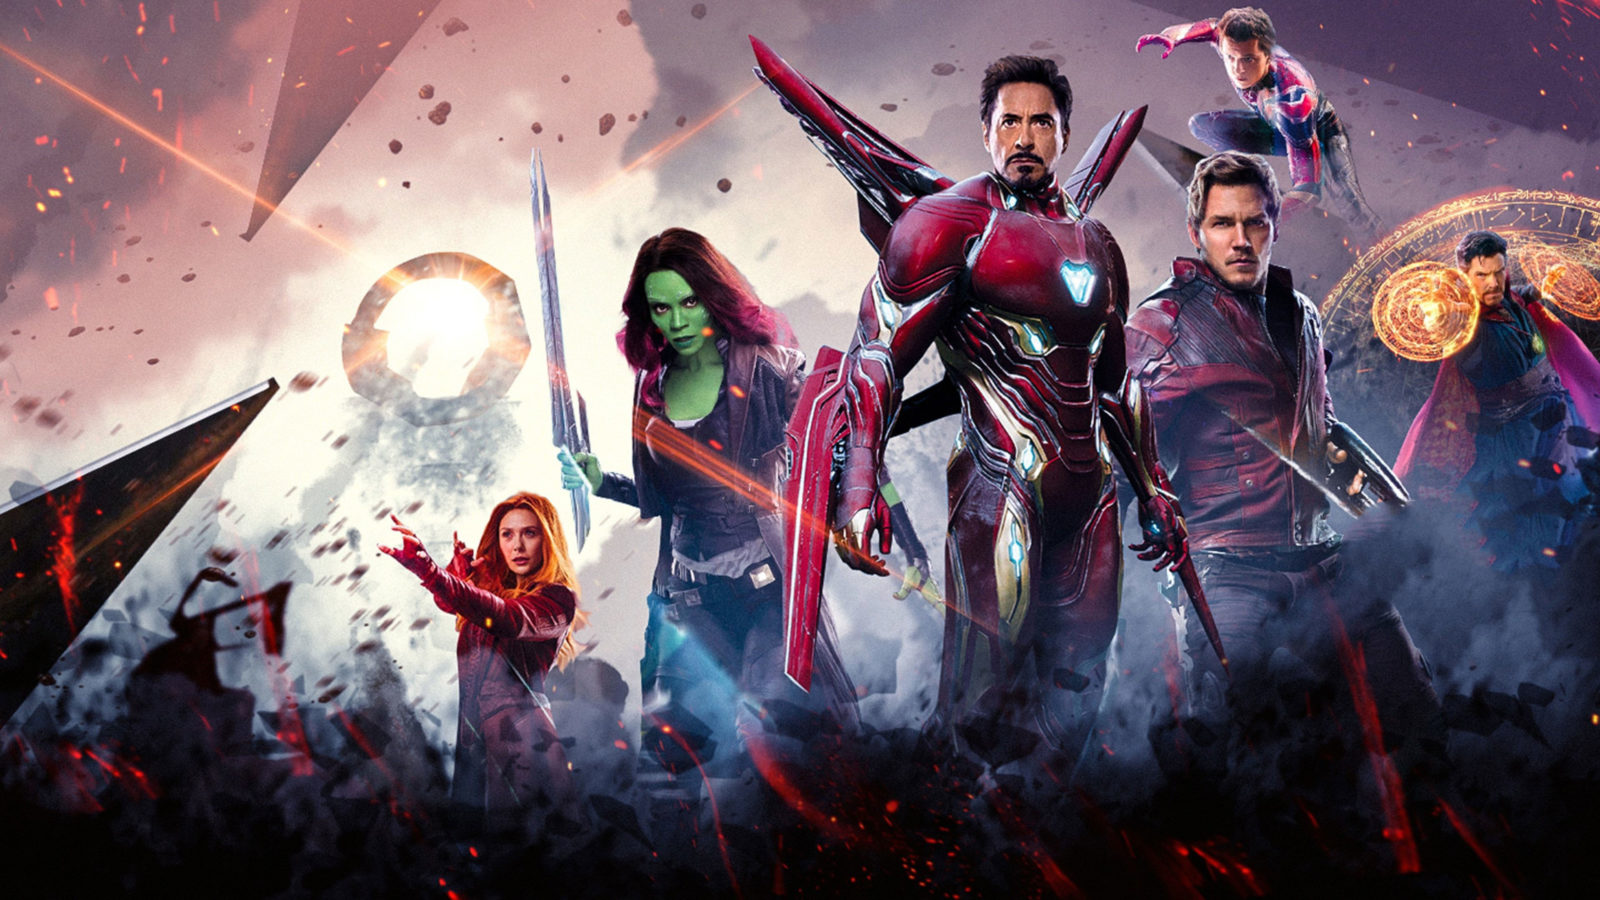 Pick an Avengers wallpaper from this selection of the best 82 images